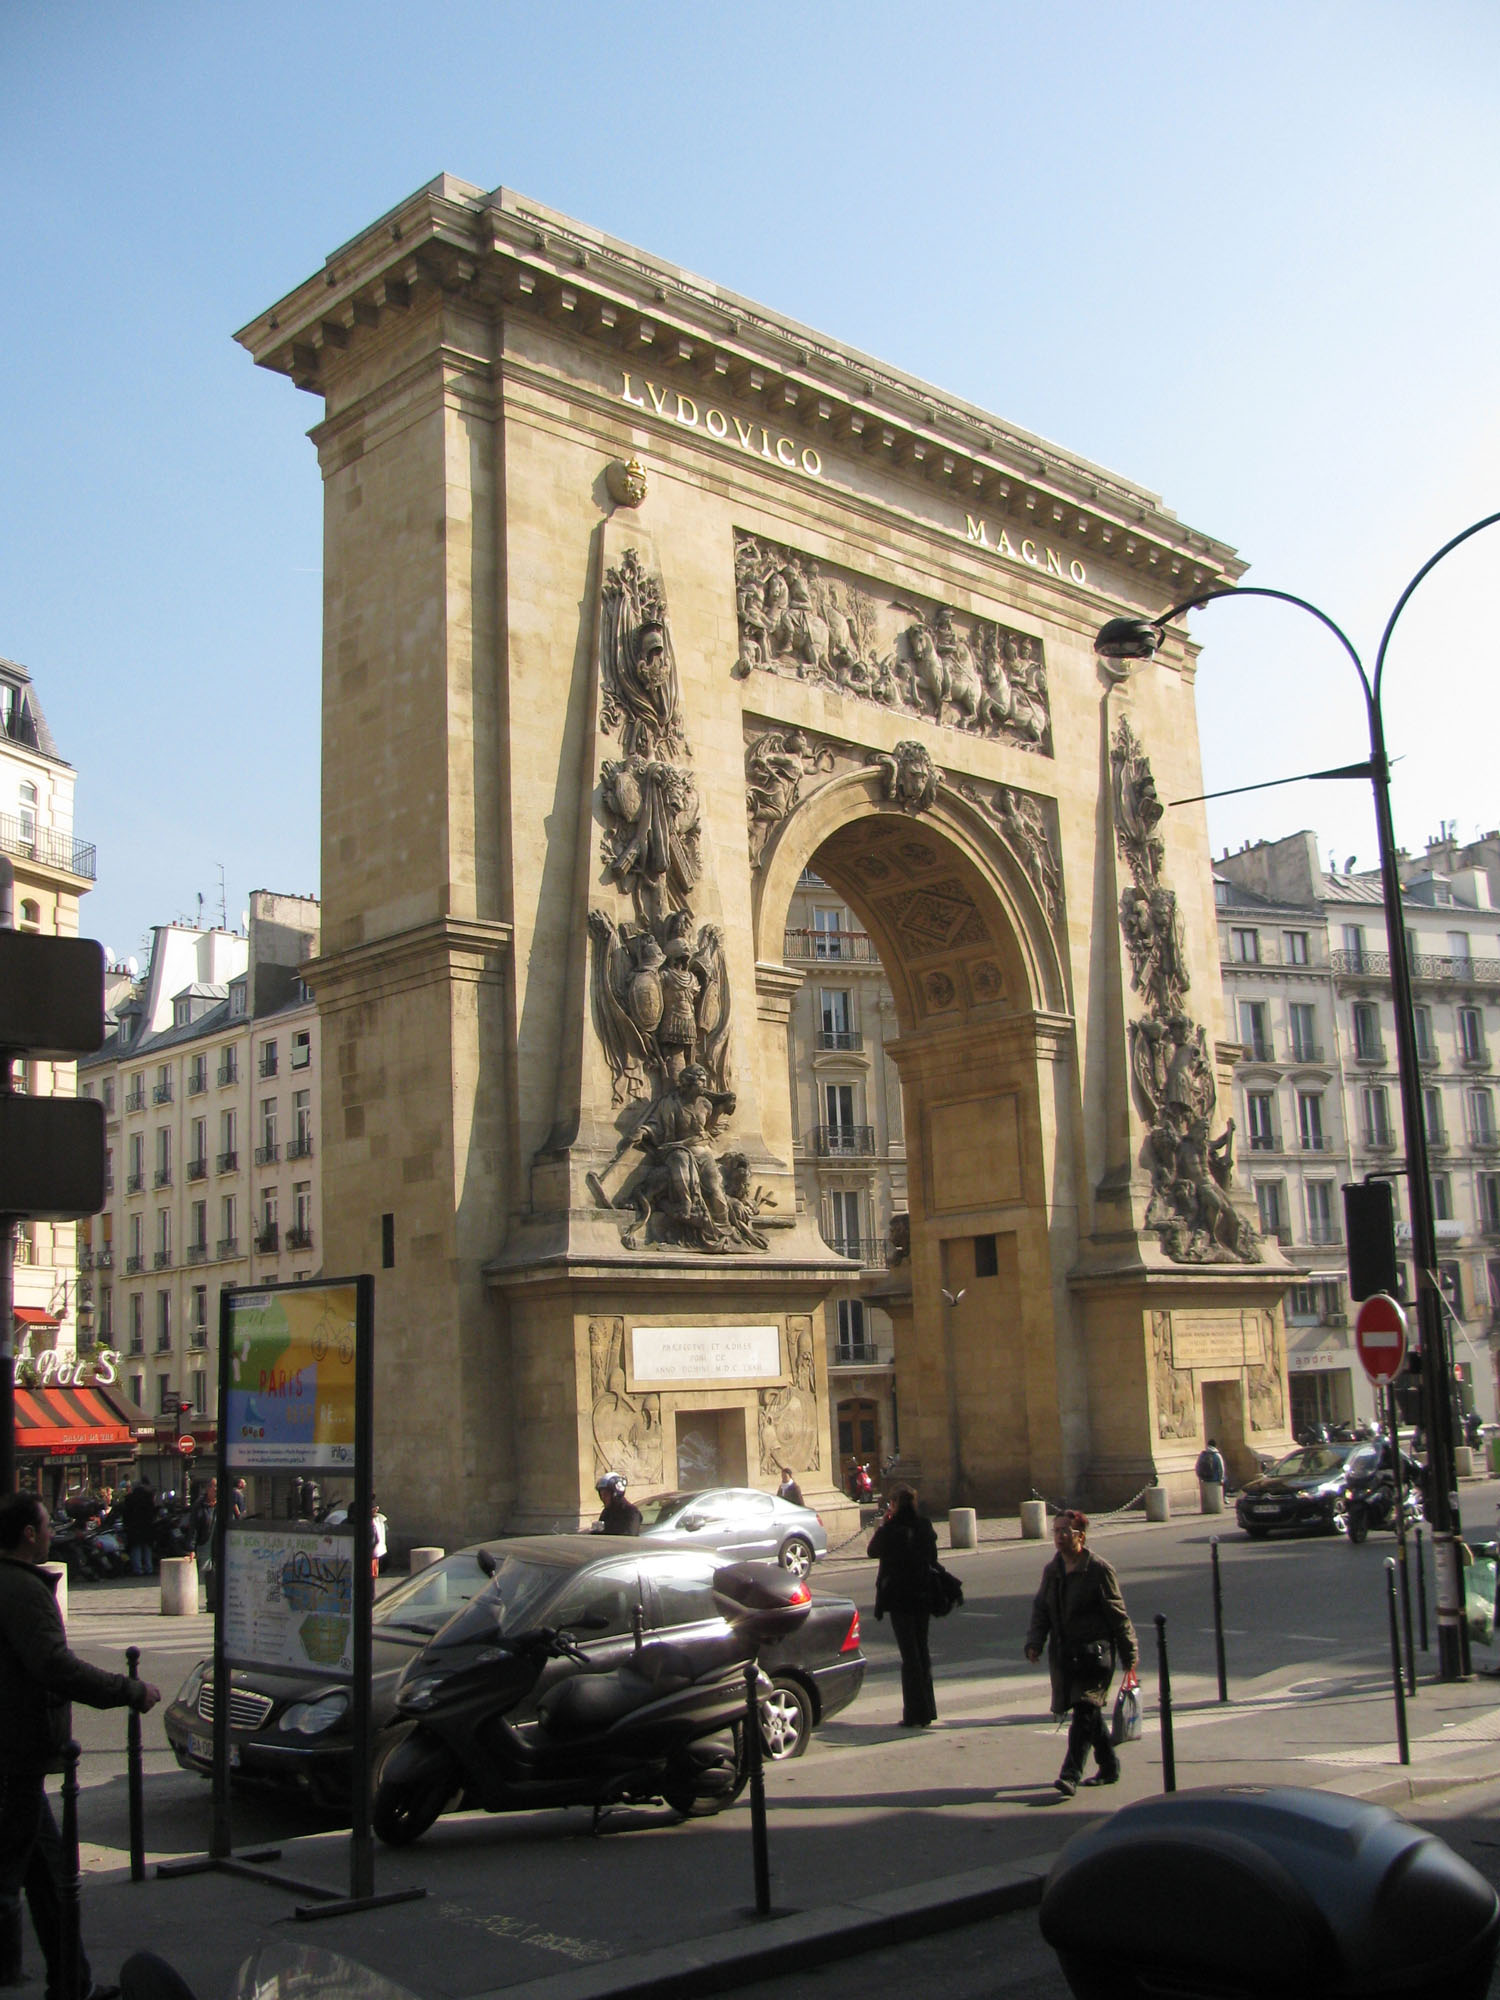 Paris: City Gate and Headless Saint | Around and About with Viv